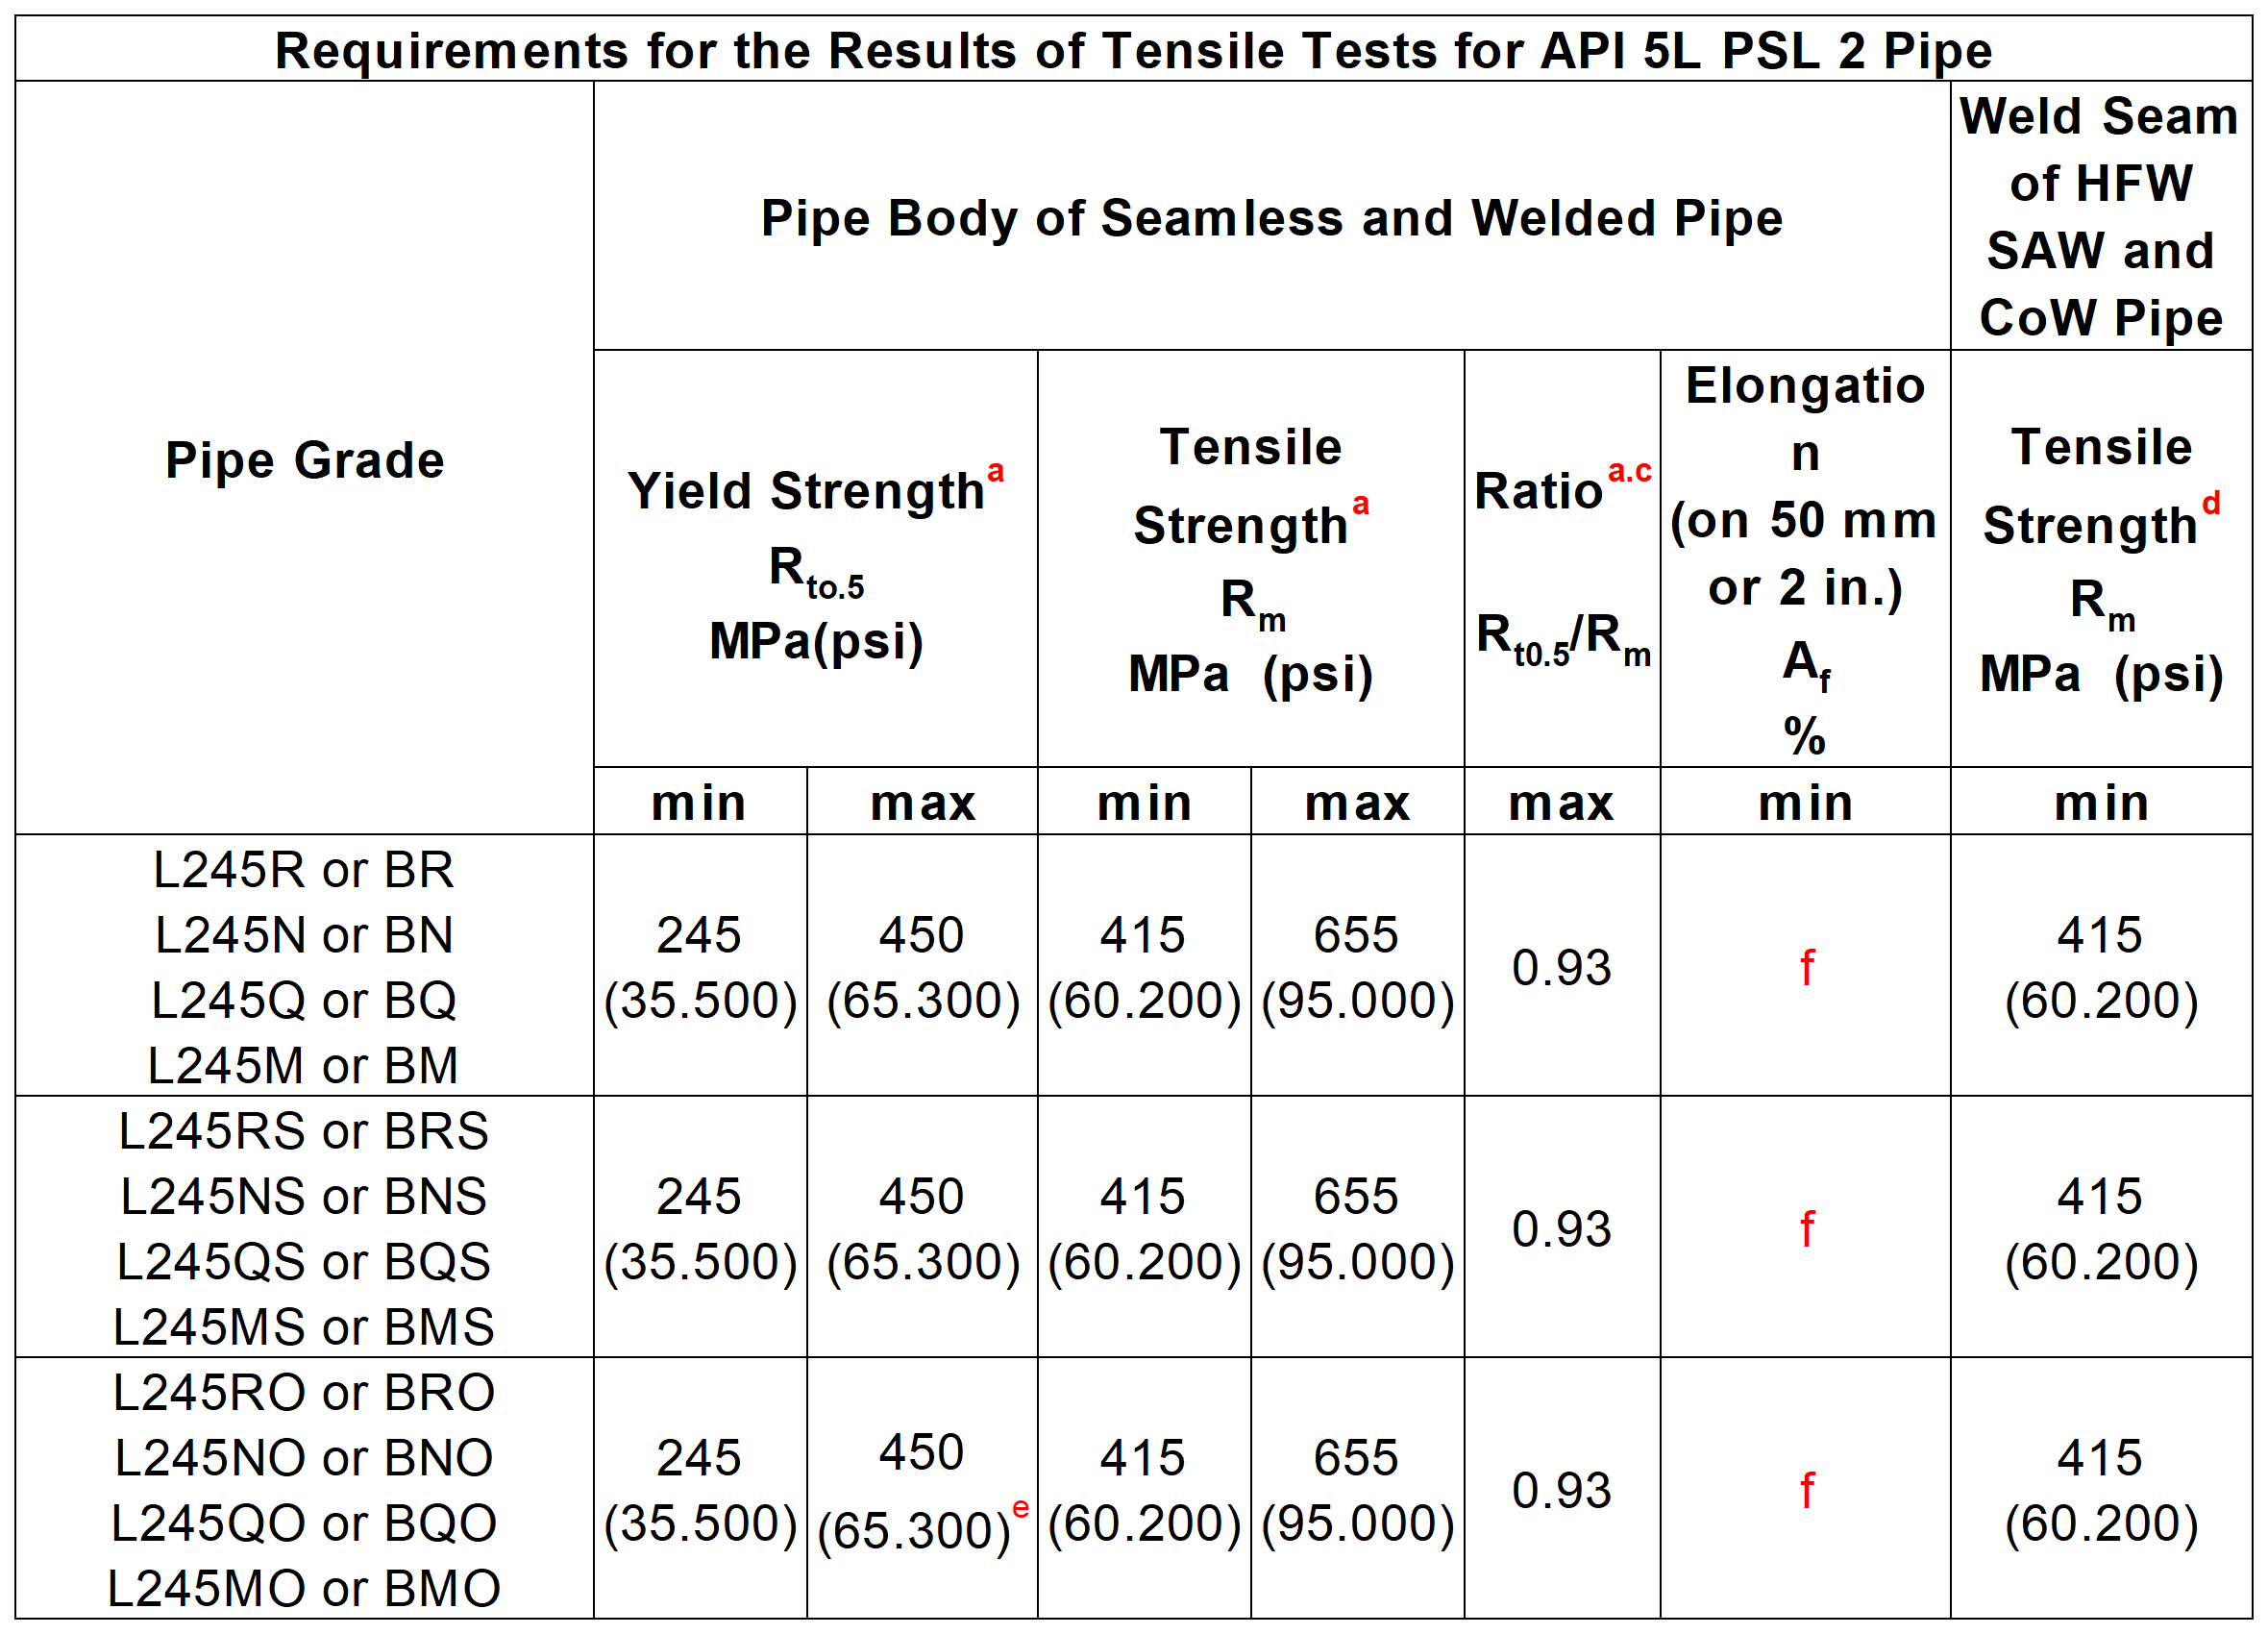 Requirements for the Results of Tensile Tests for API 5L PSL 2 Pipe